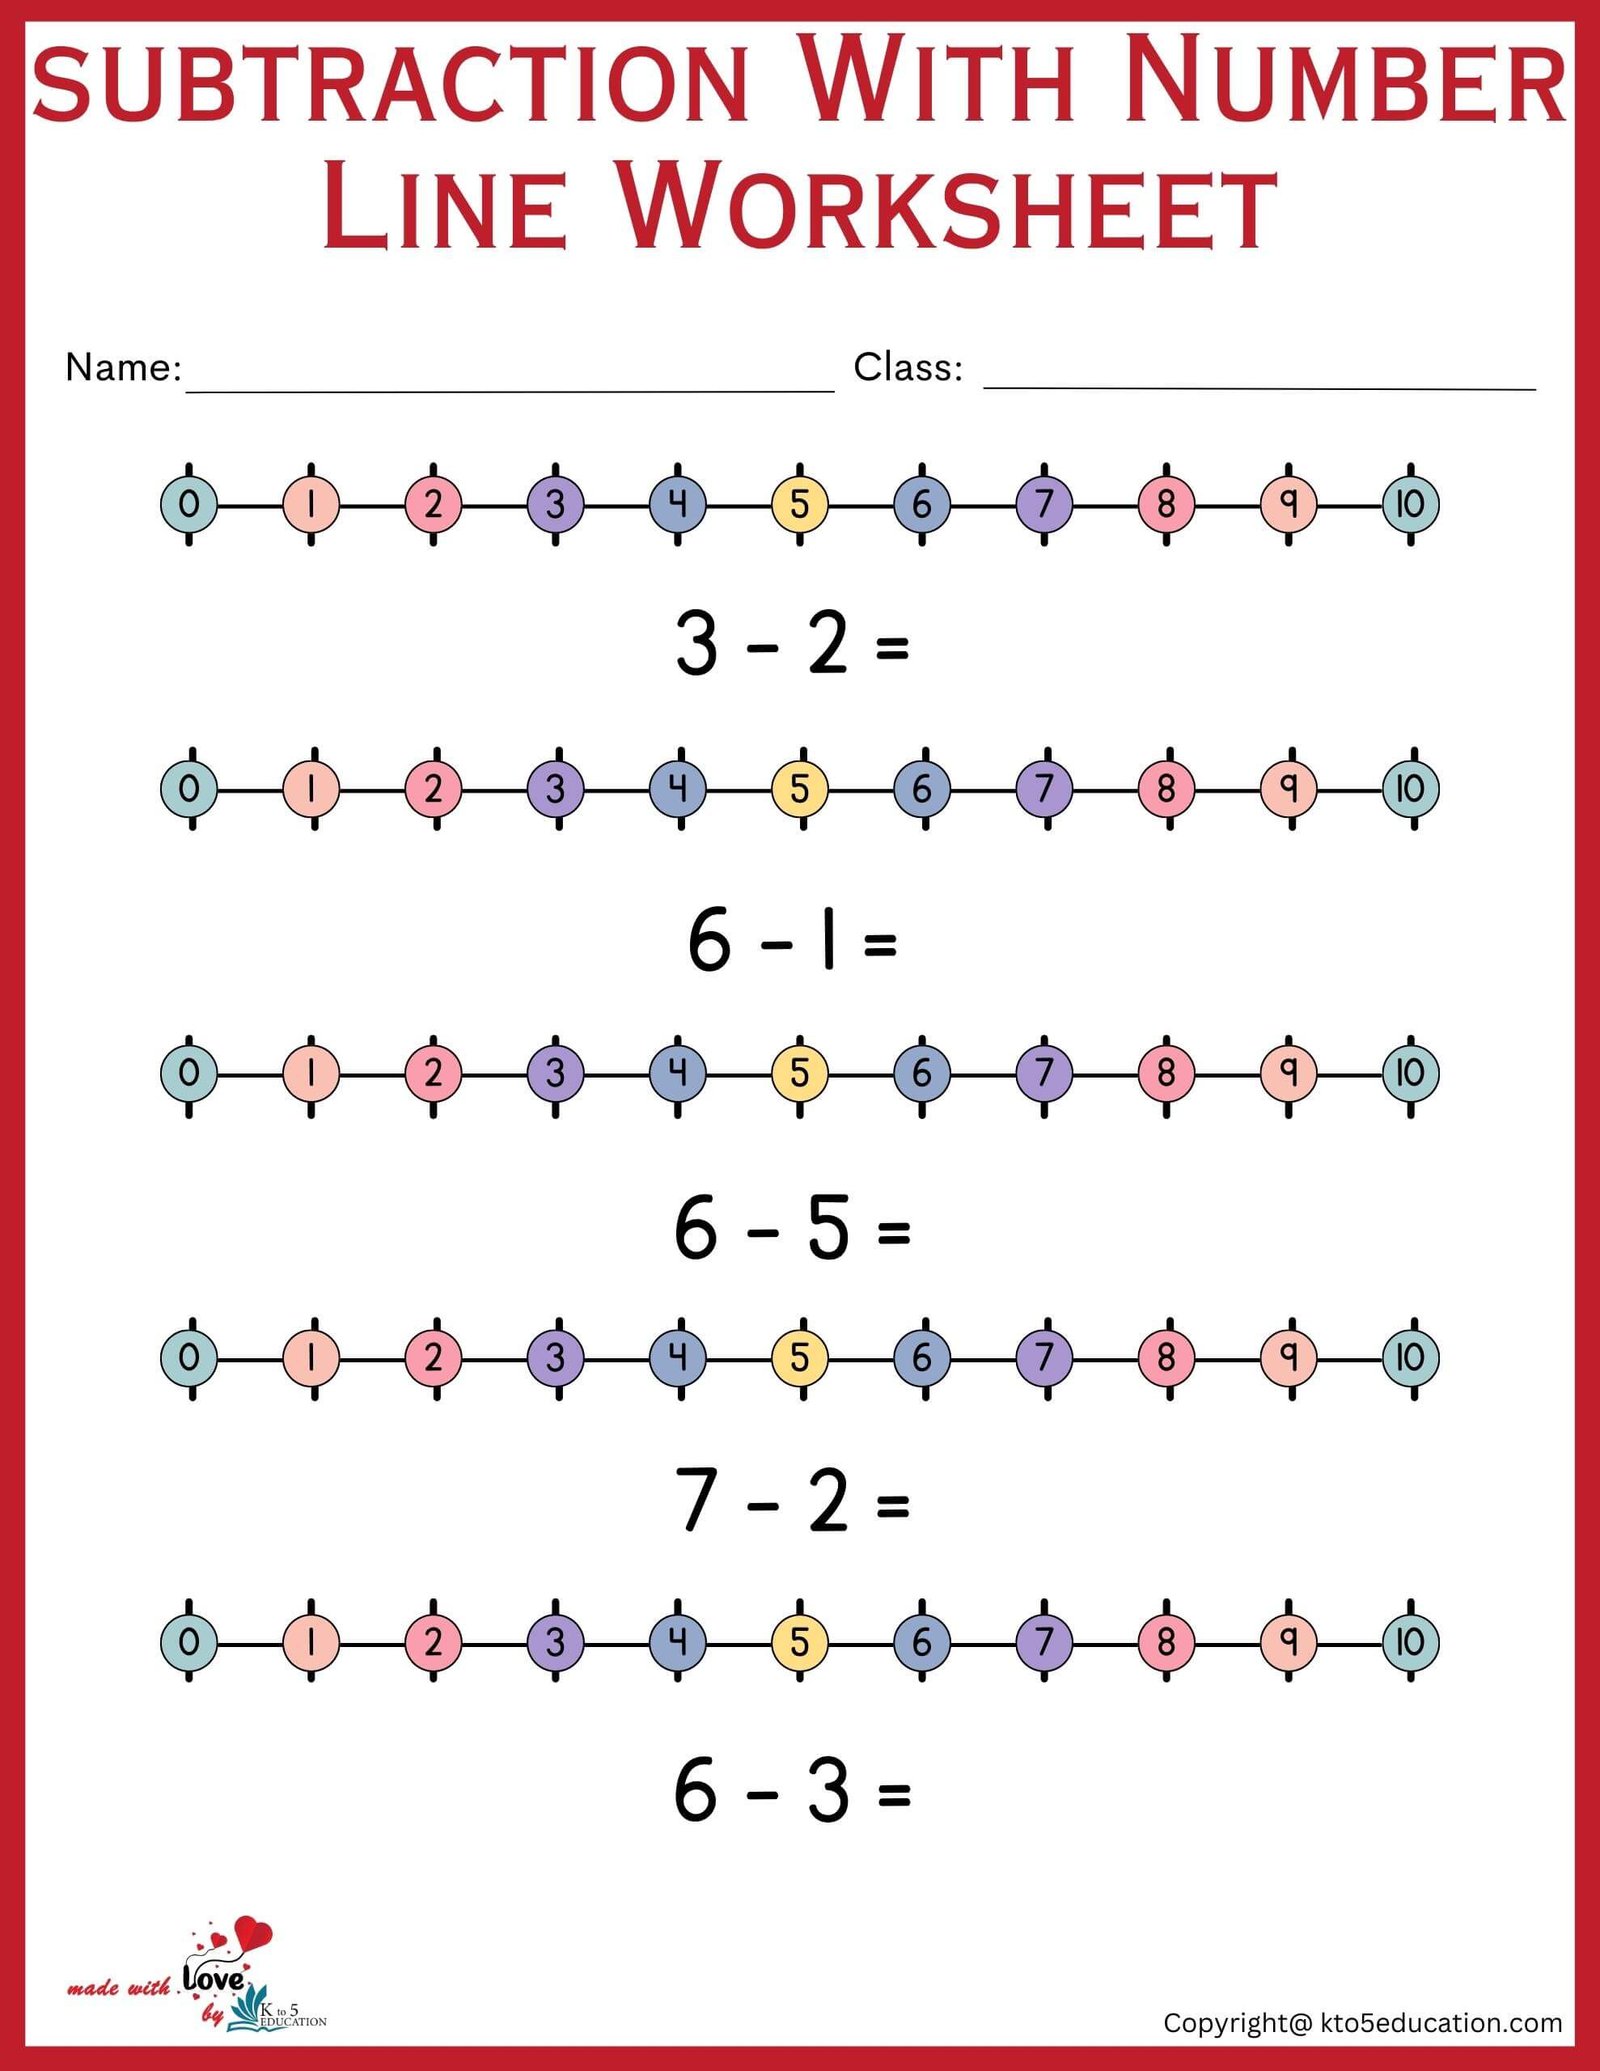 Free Subtraction With Number Line Worksheet 1-10